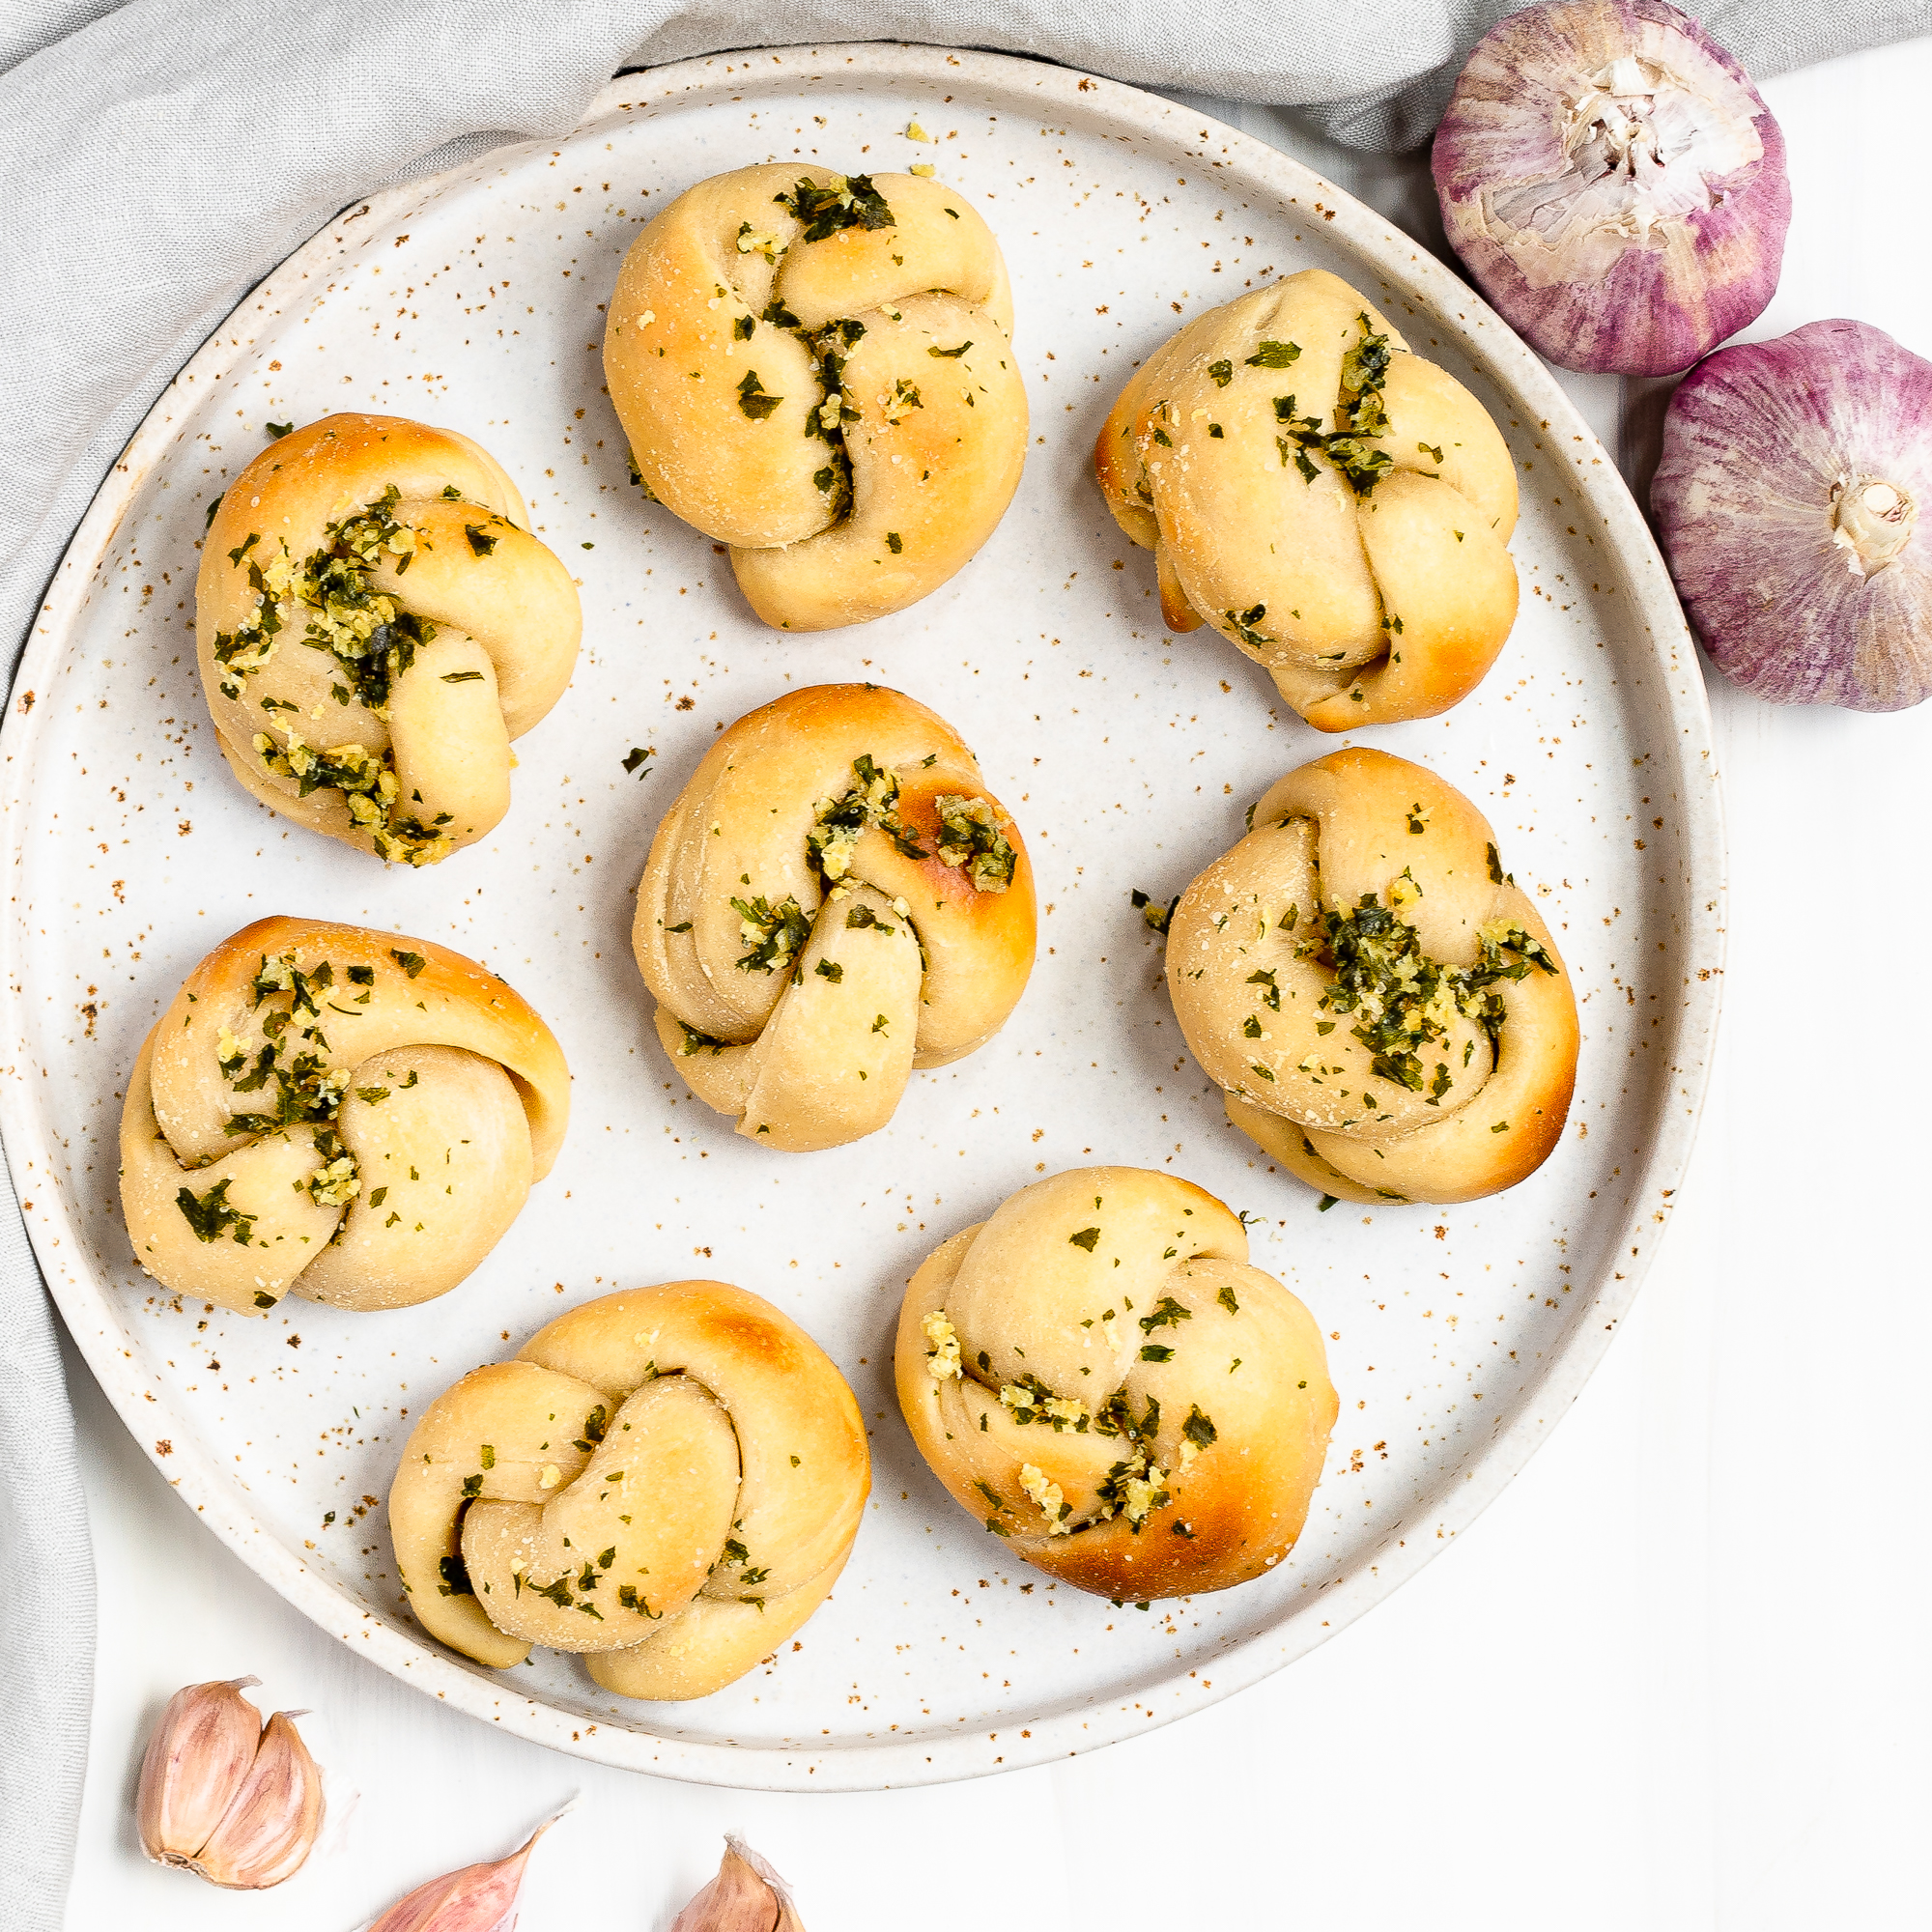 8 sourdough discard garlic knots on a plate with some purple garlic surrounding the plate